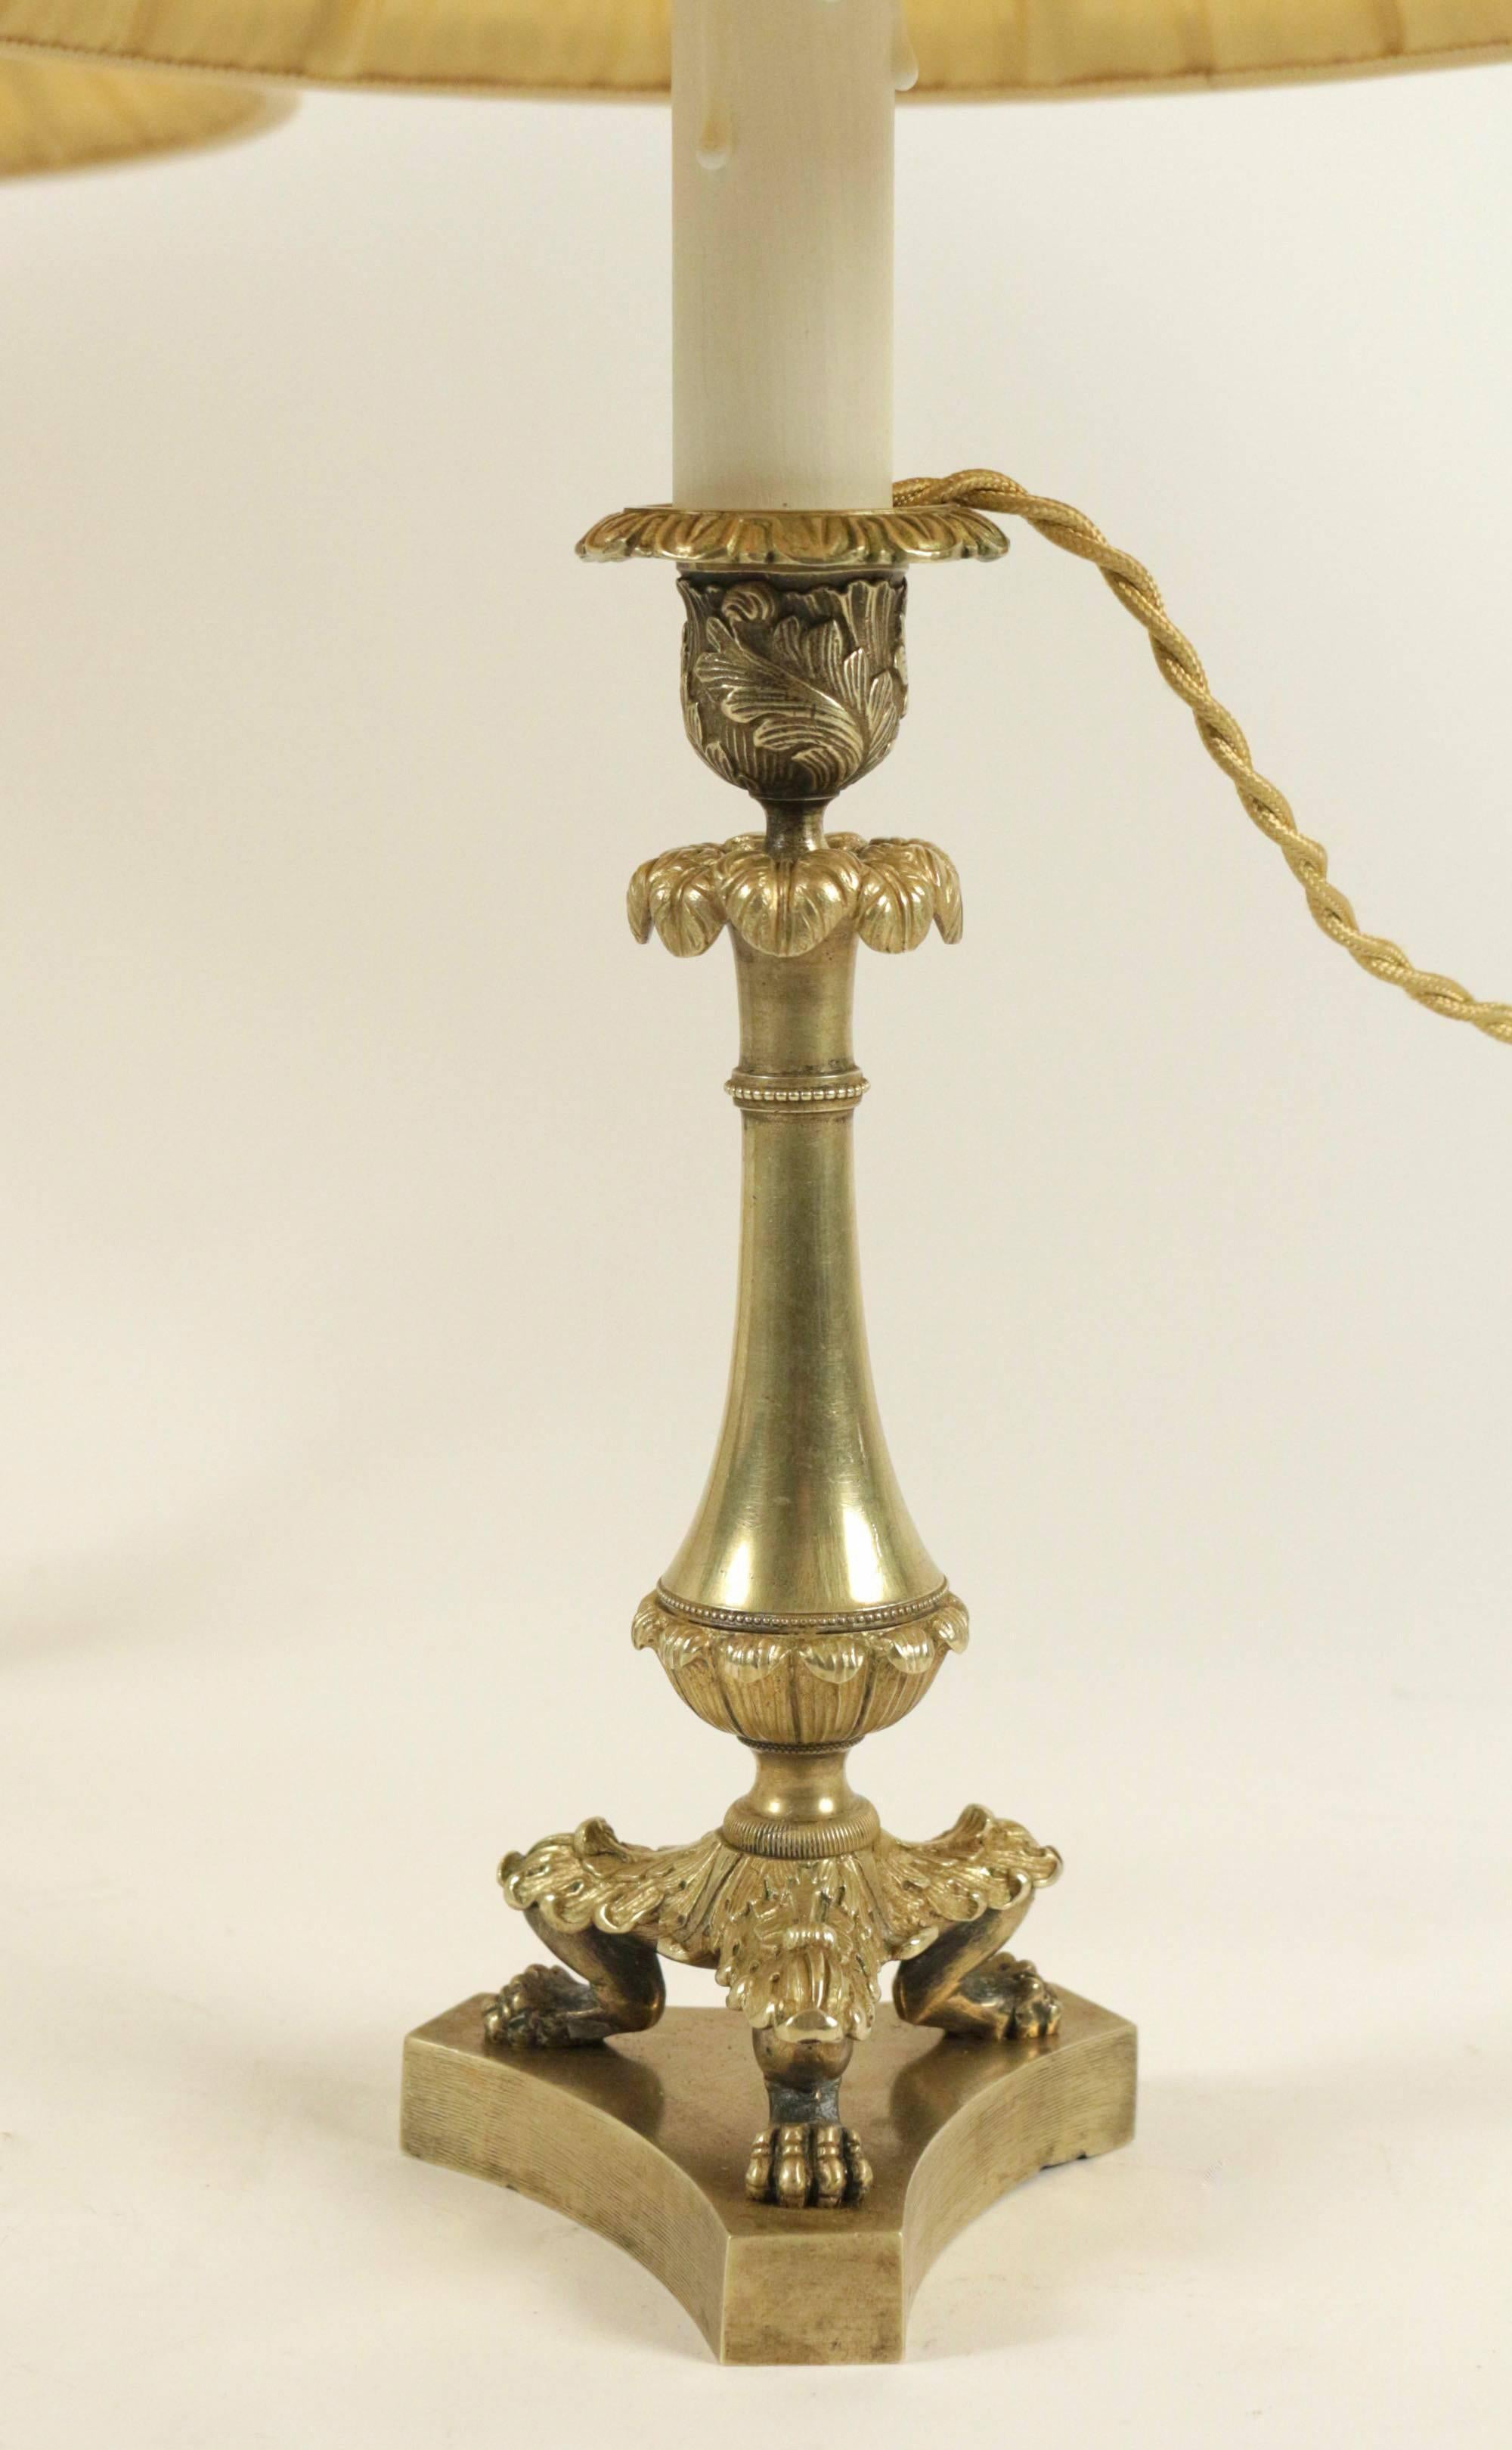 19th Century Pair of French Restauration Period Gilt-Bronze Candlestick Lamps, circa 1840